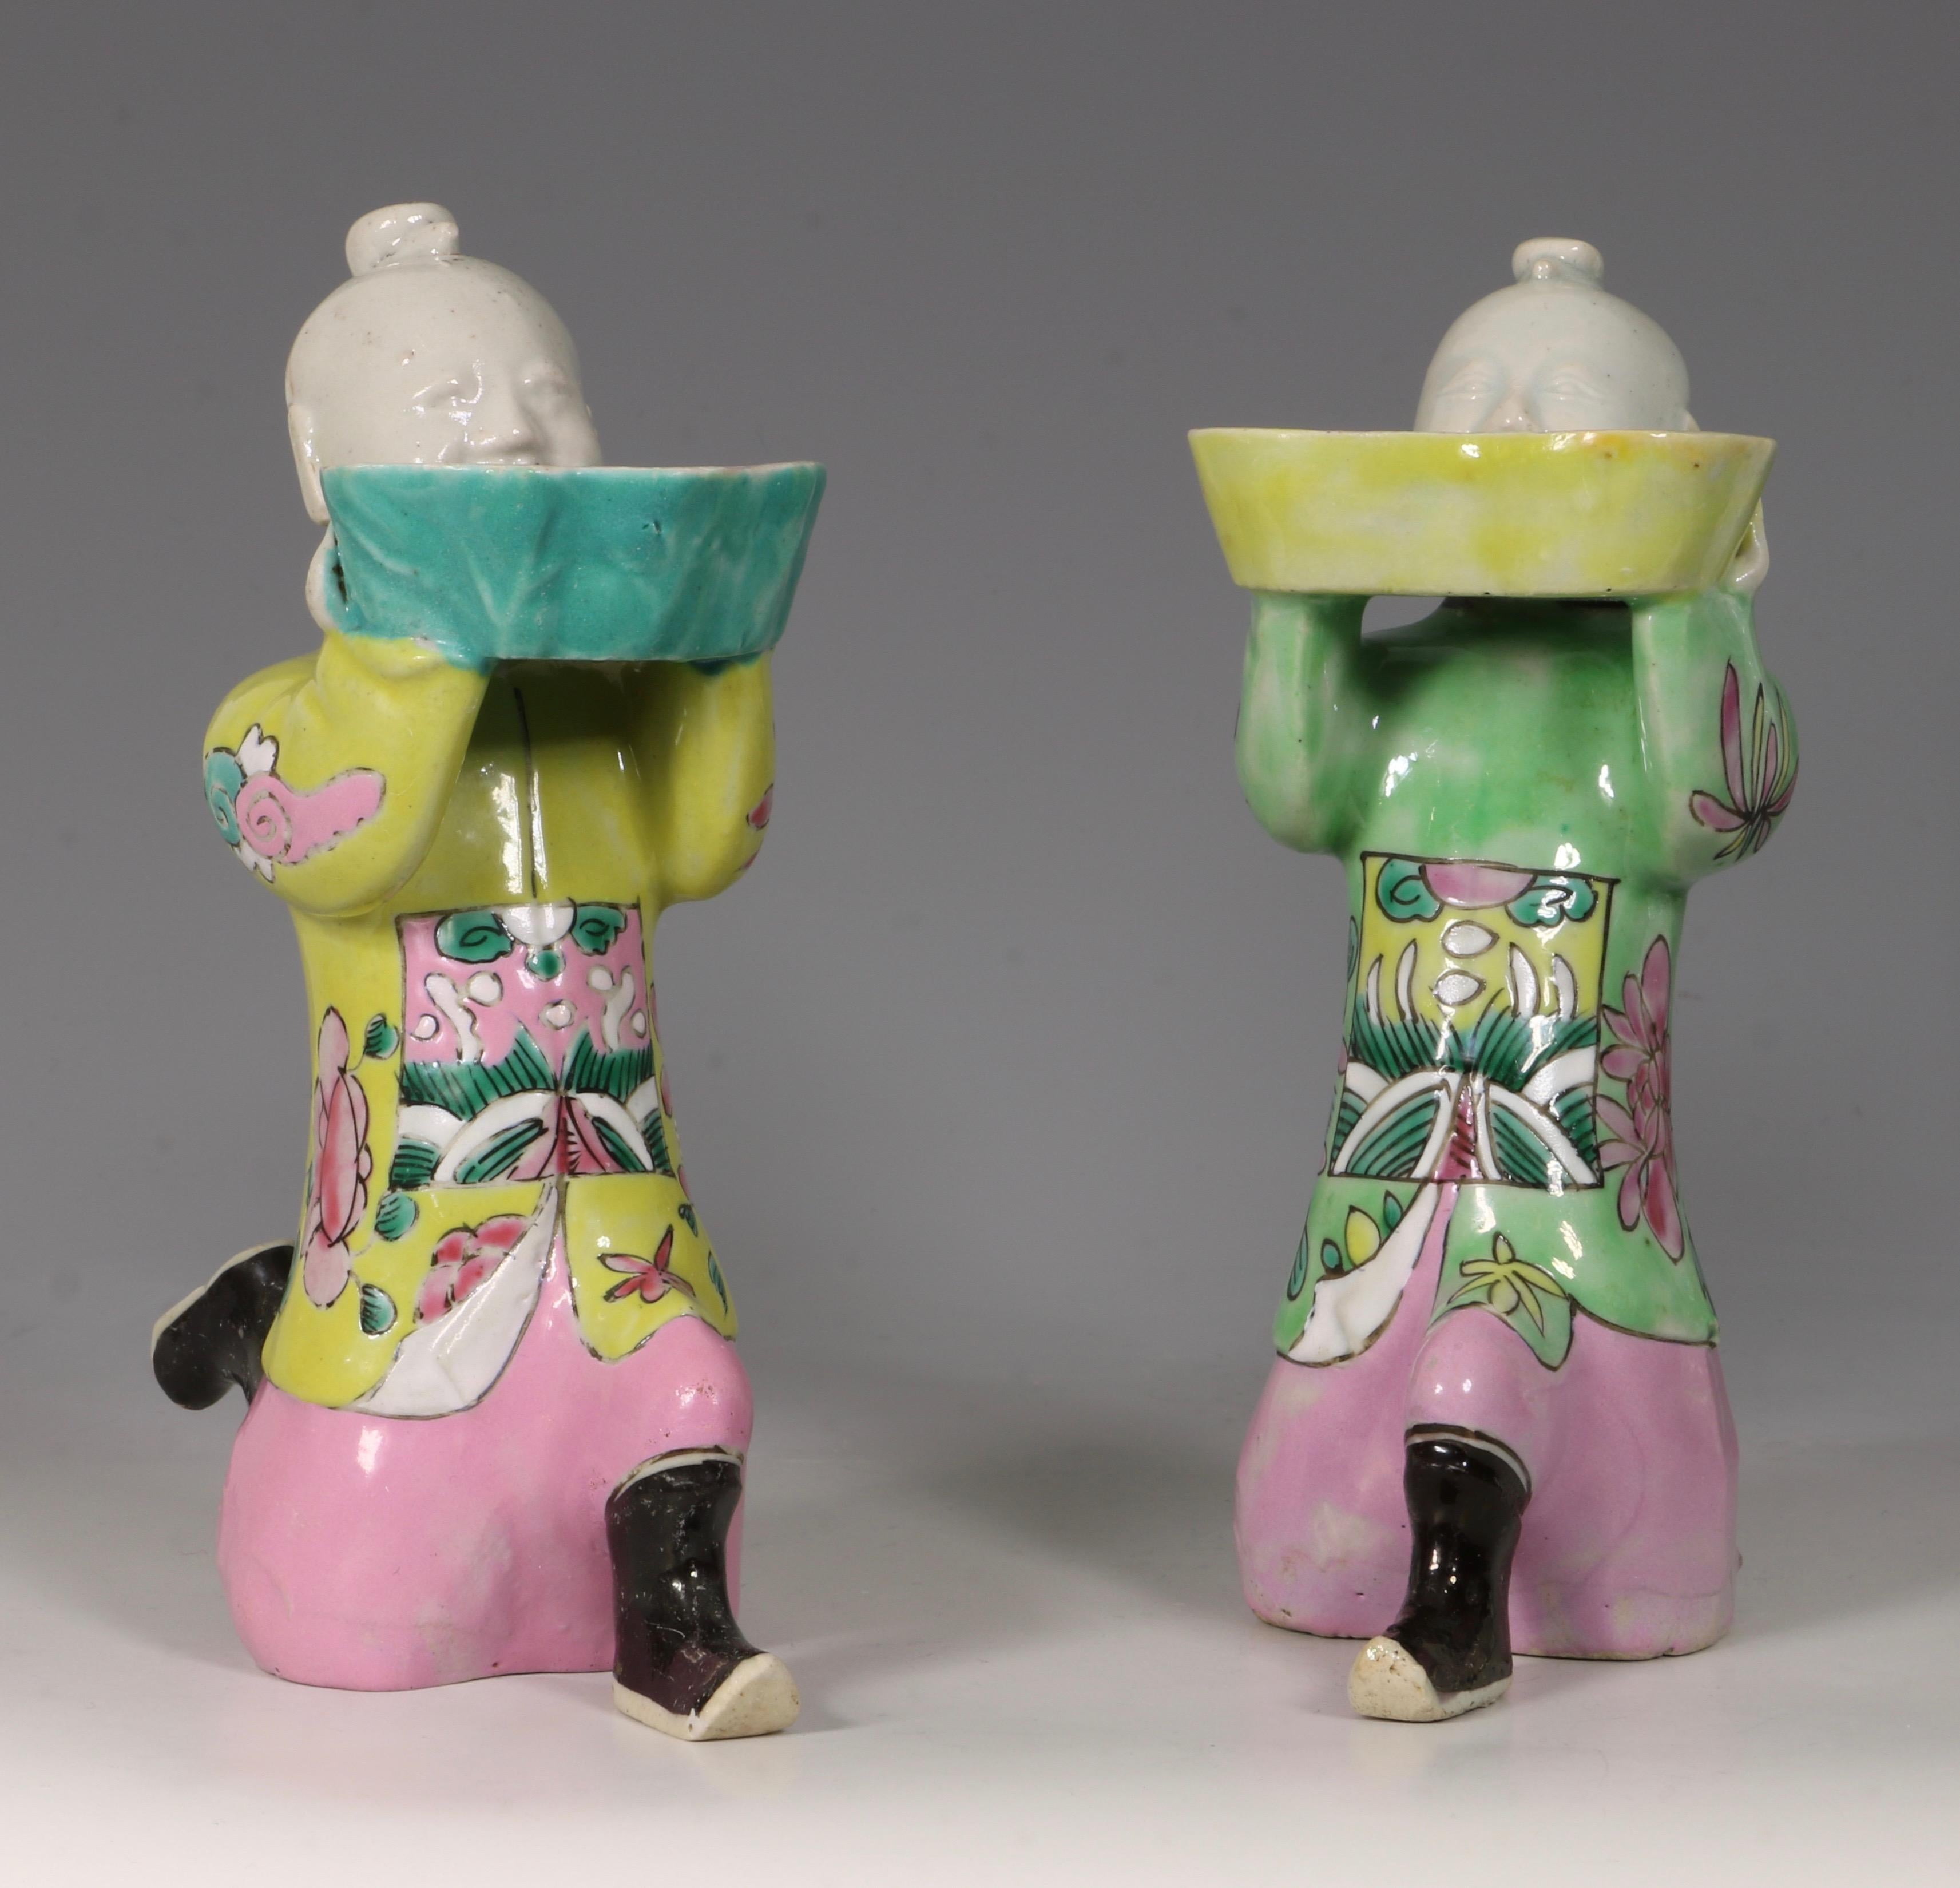 A pair of Famille Rose figures of kneeling boys as water droppers 18th-19th century.
One with a yellow and the other with a green robe, both with pink trousers.
Each with a hole at the back of the head and supporting a shaped bowl containing an